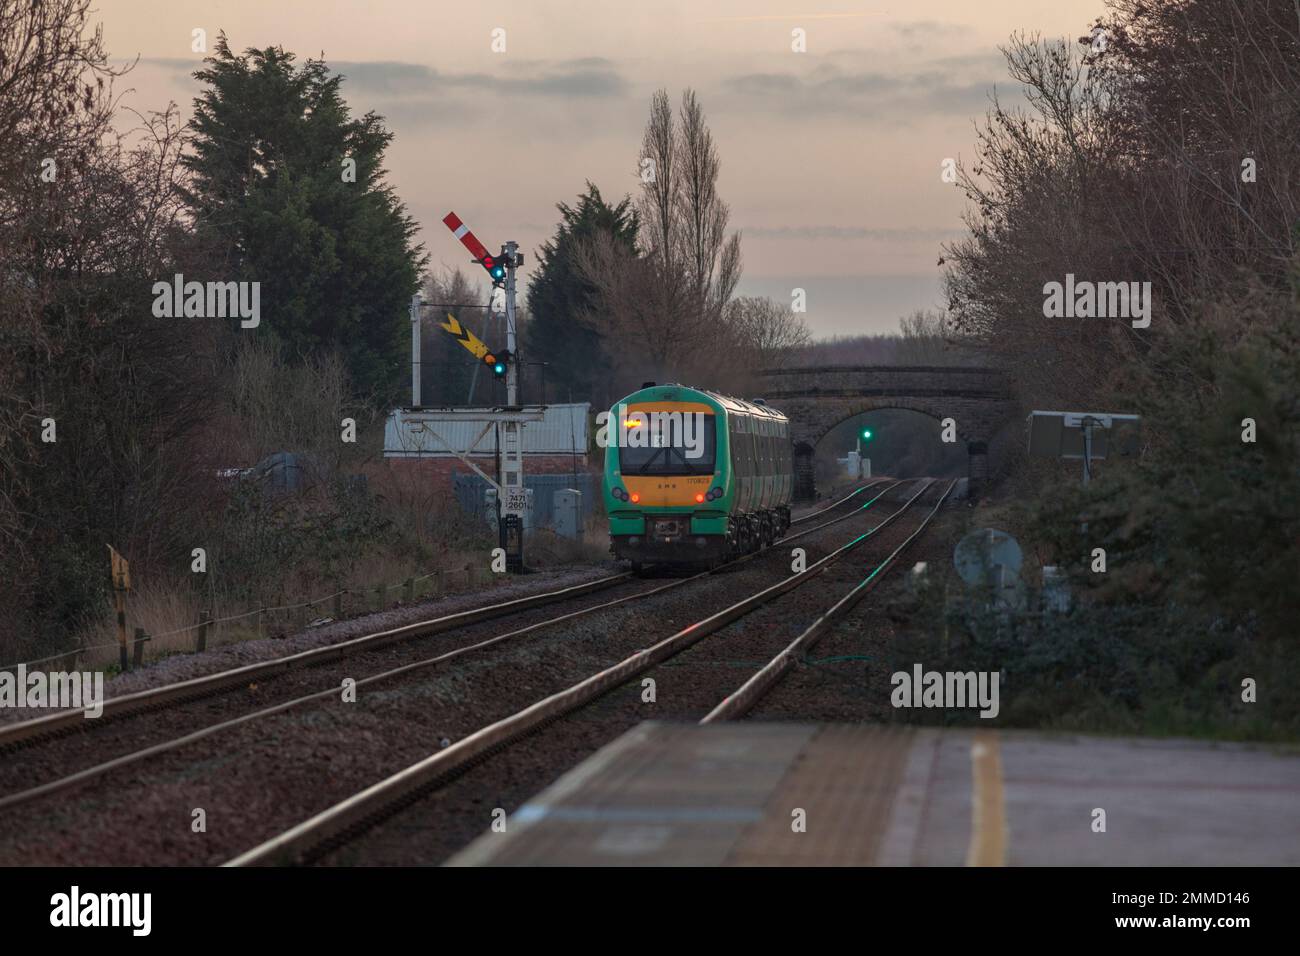 East Midlands railway class 170 Turbostar 170923 (still carrying Southern livery) departing Creswell on the Robin Hood line passing a semaphore signal Stock Photo